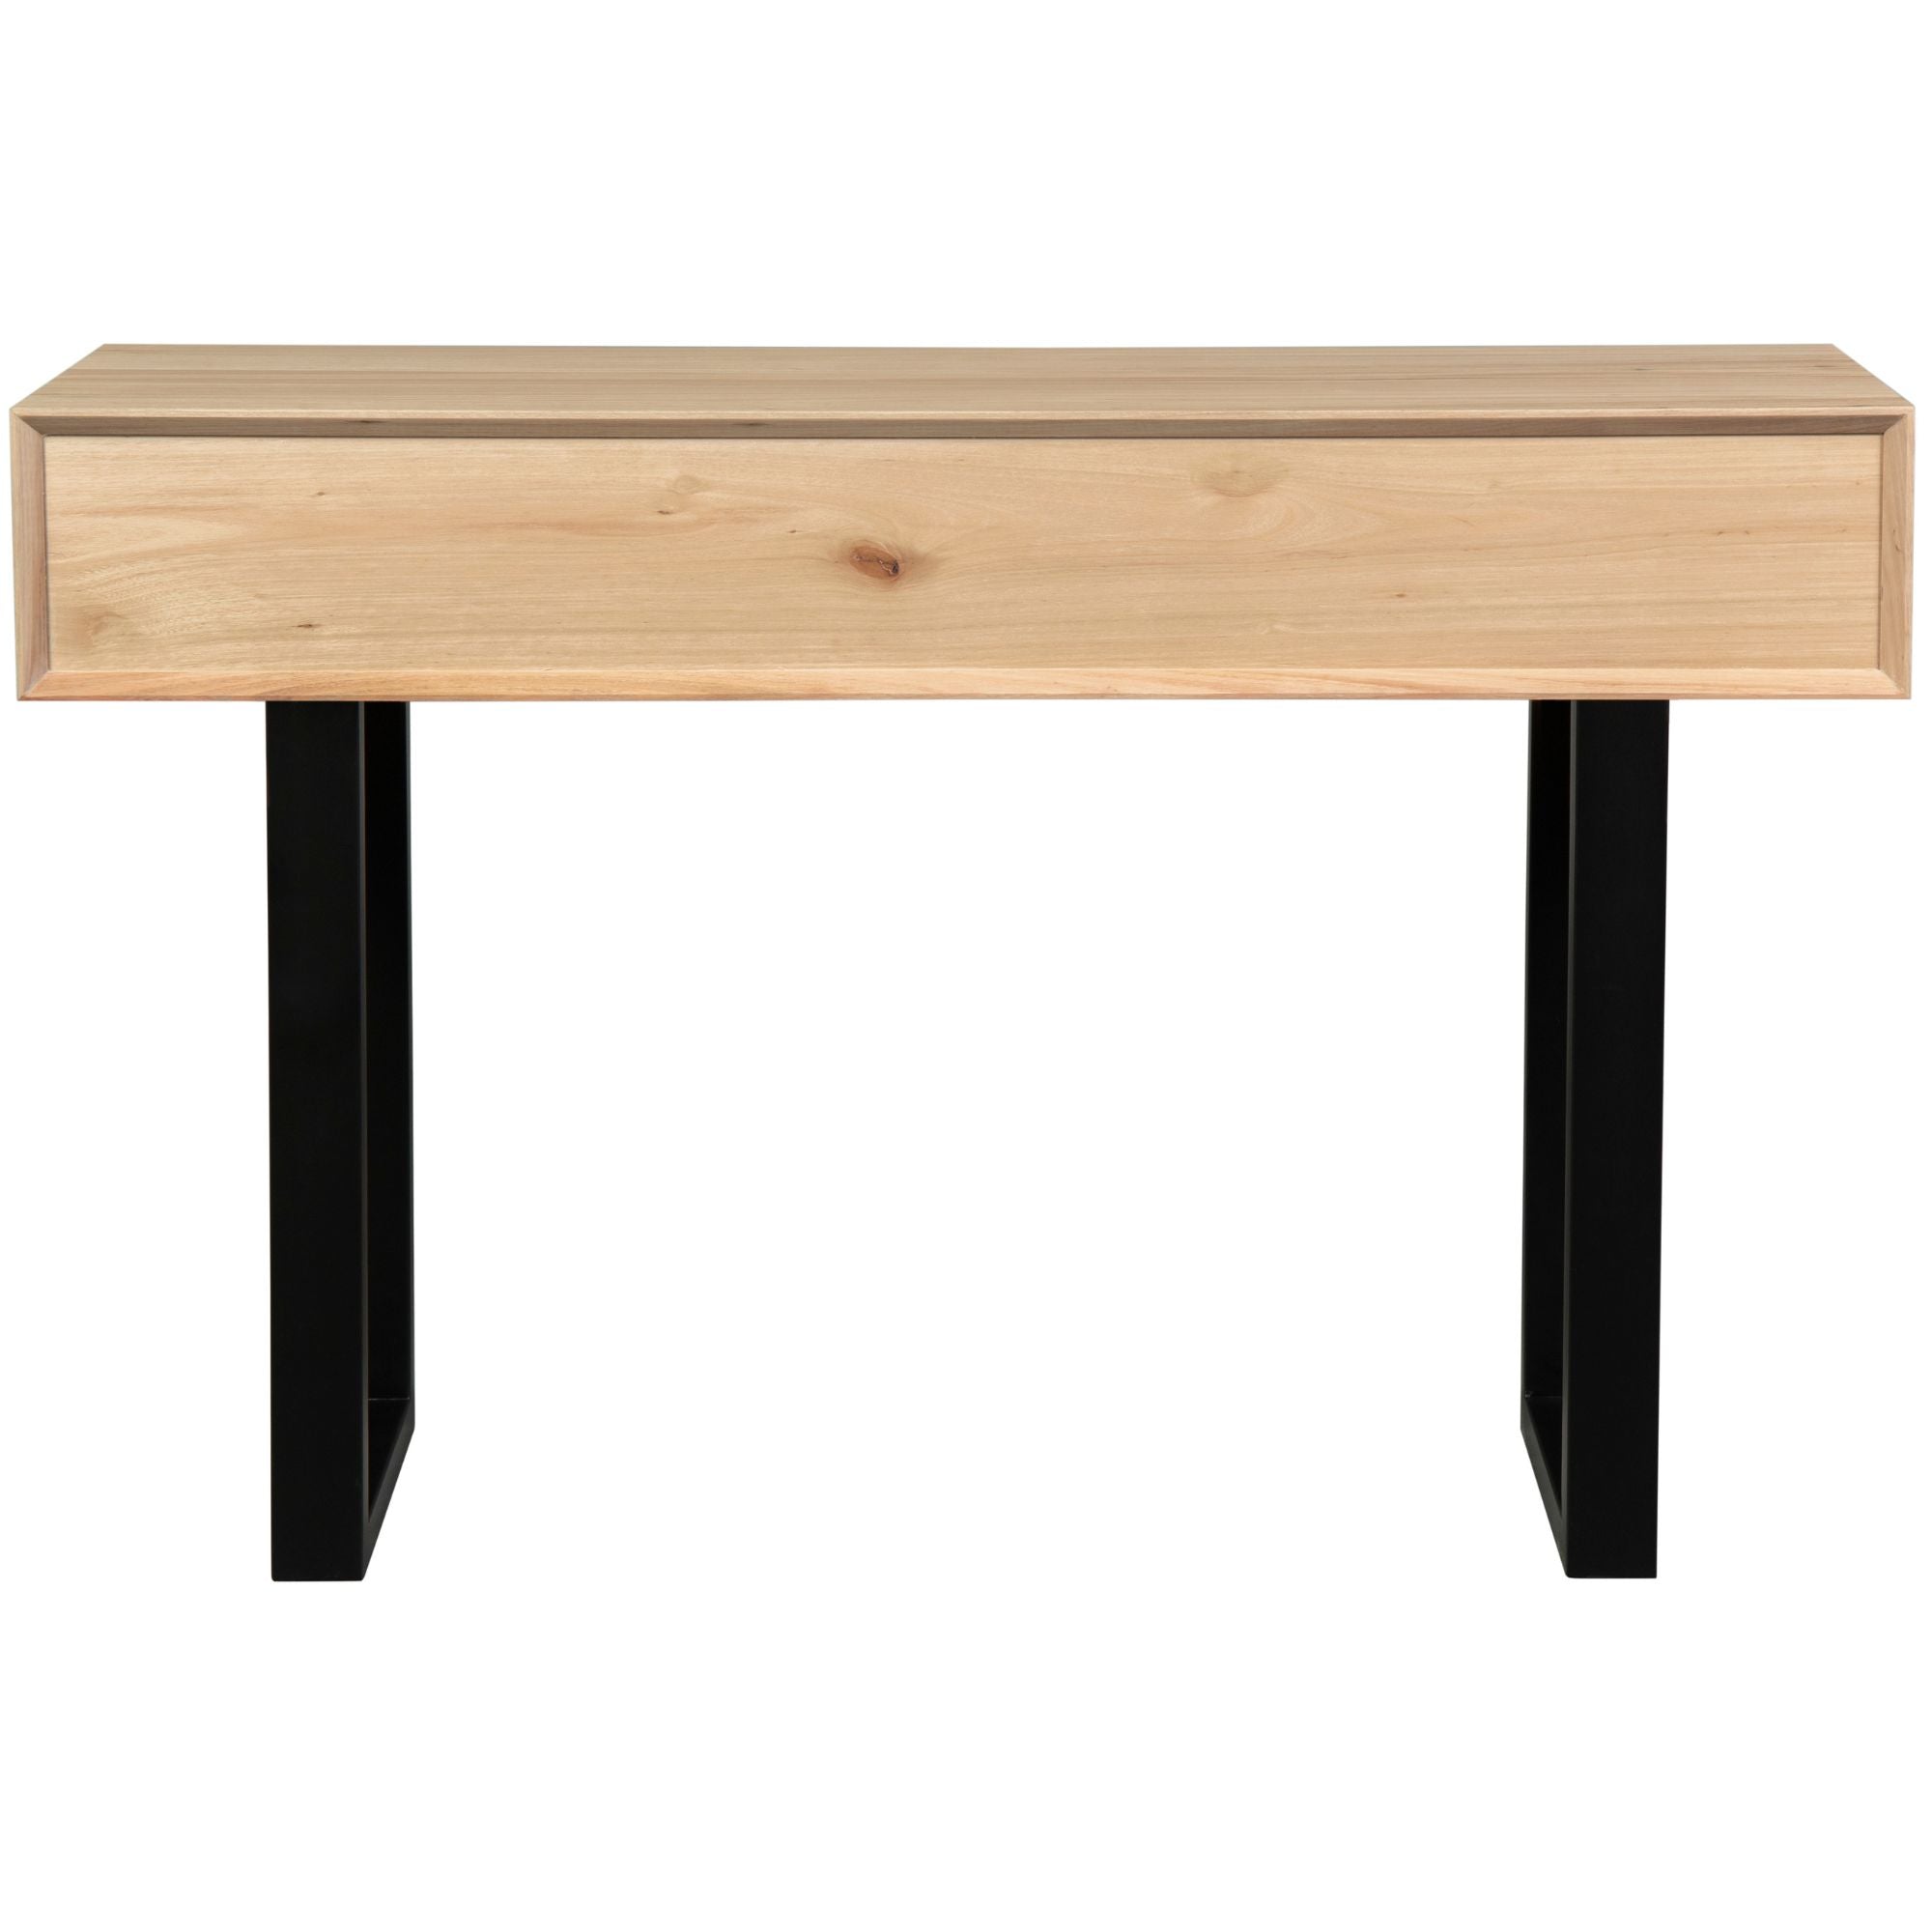 Aconite Console Hallway Entry Table 120cm Solid Messmate Timber Wood - Natural